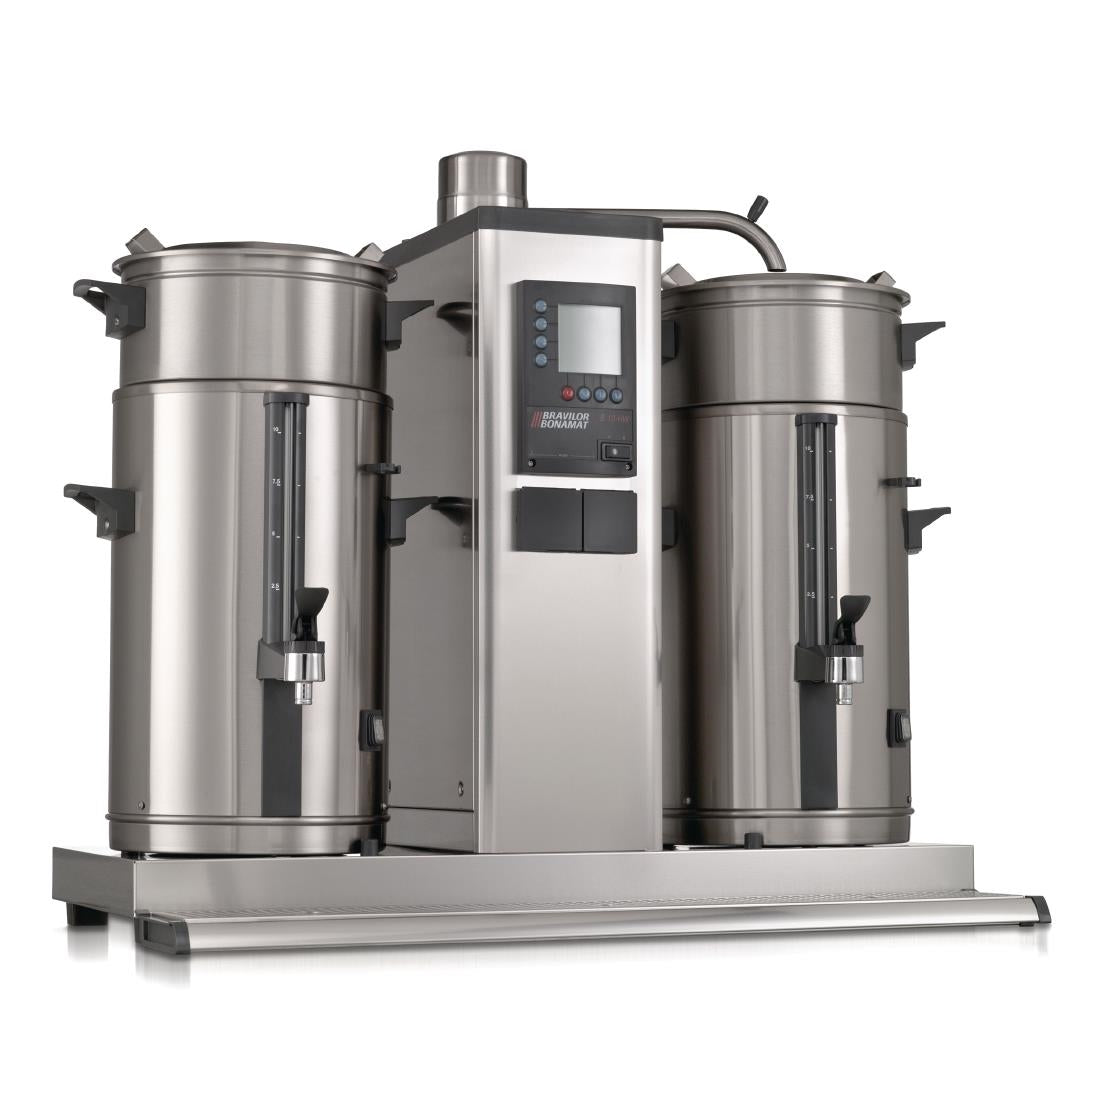 DC684 Bravilor B40 Bulk Coffee Brewer with 2x40Ltr Coffee Urns 3 Phase JD Catering Equipment Solutions Ltd